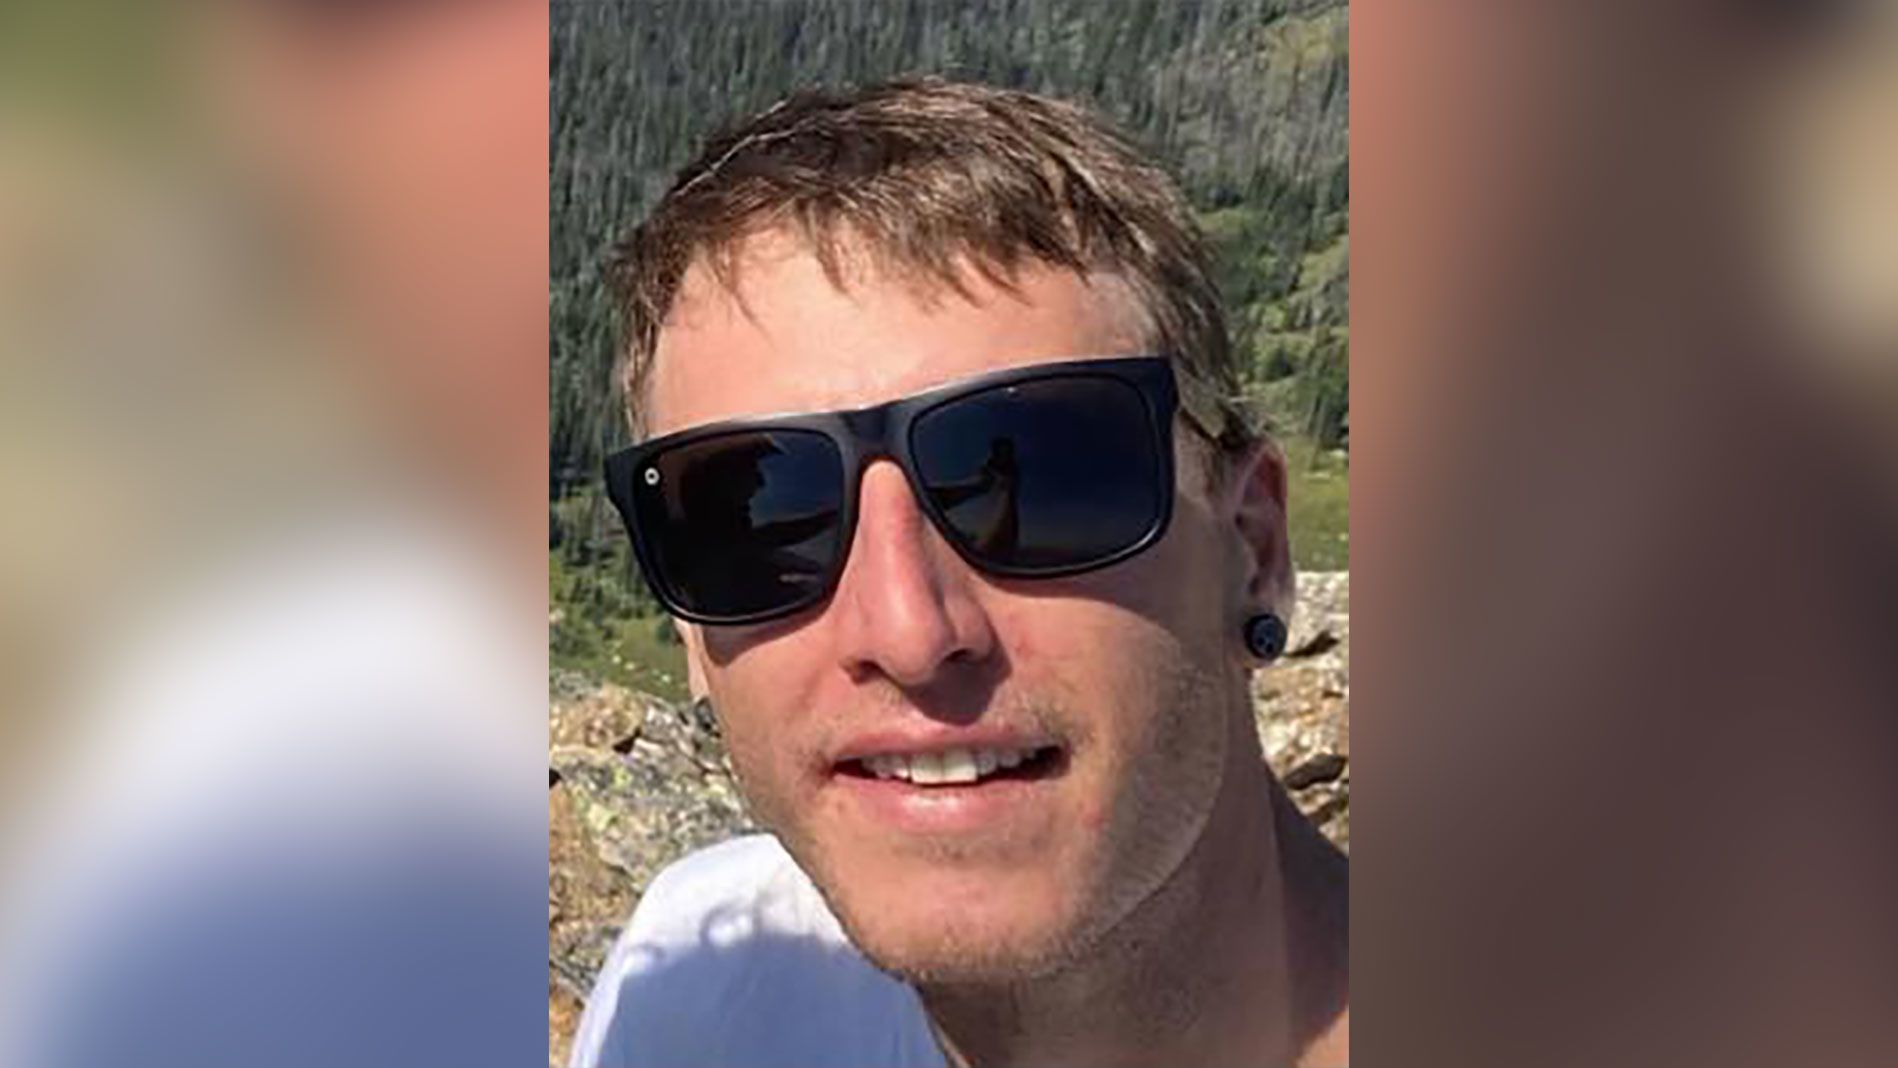 Adam Fuselier, from Castle Pines, Colorado, went missing last week while hiking in Montana. (Glacie...